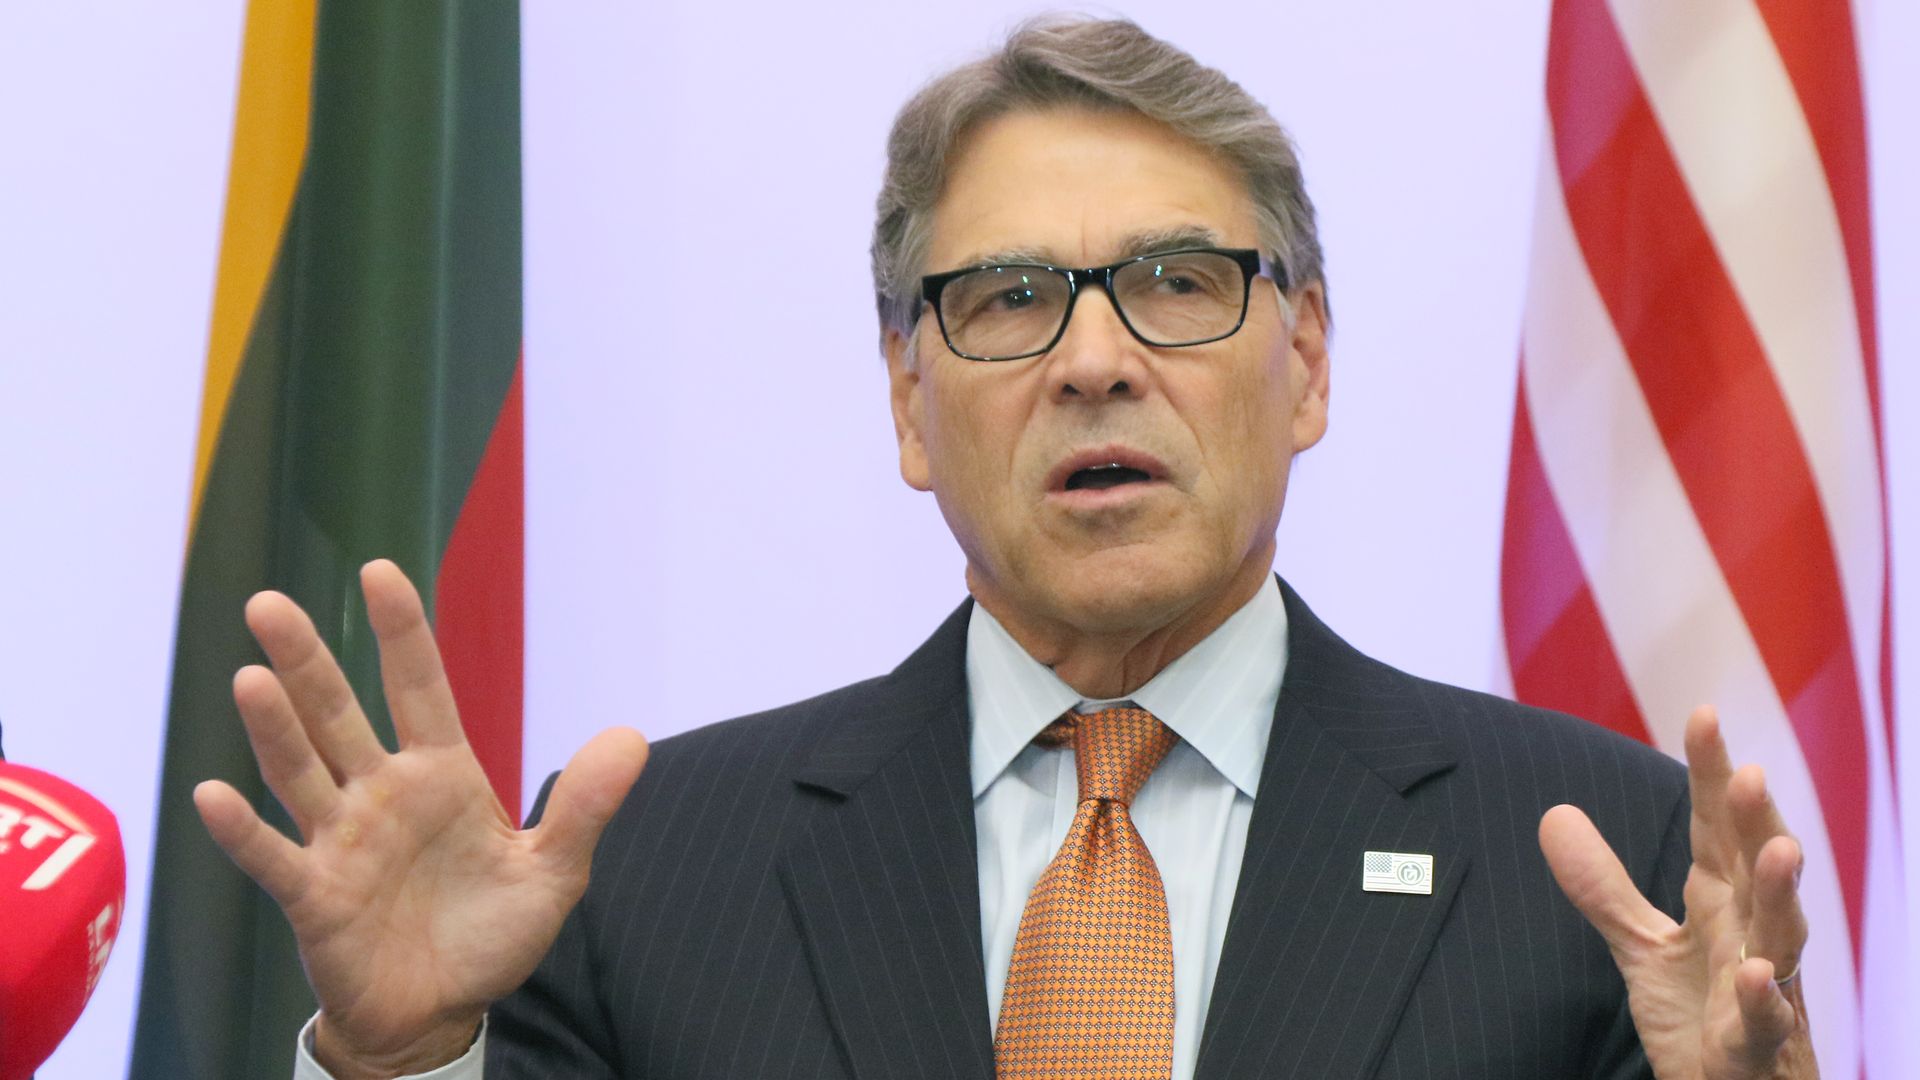 Secretary of Energy Rick Perry delivers a statementduring a meeting in Vilnius, Lithuania